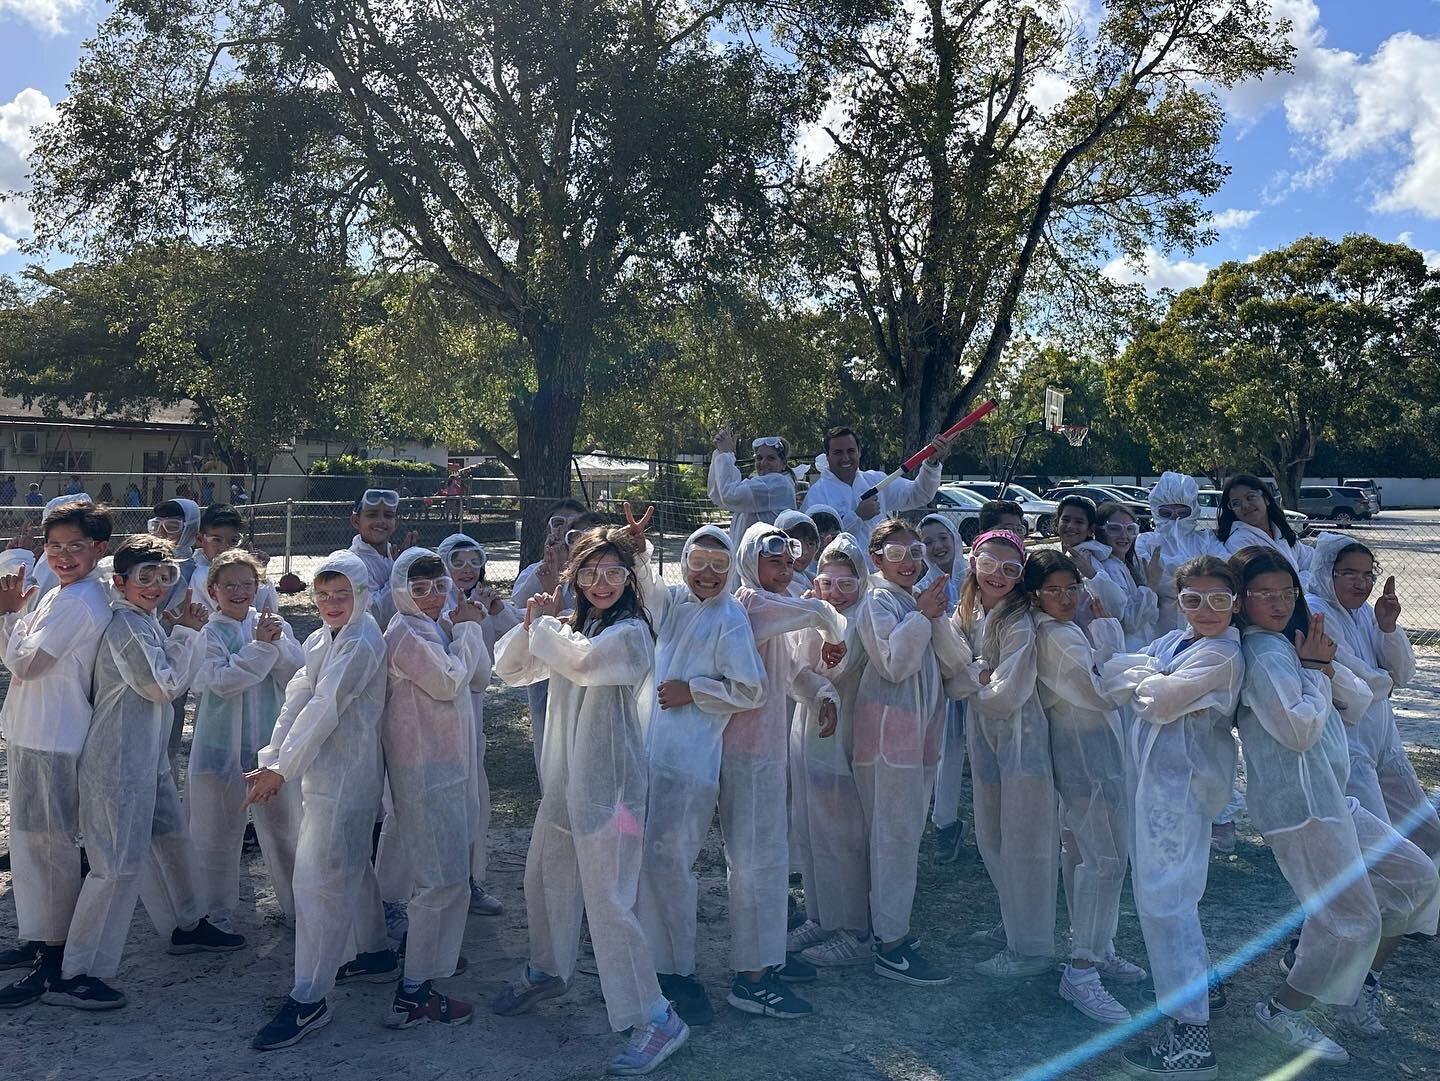 Congratulations to our 4th Grade Class for earning a Paint the Principal afternoon during Give Miami Day! 

We couldn&rsquo;t have done it without the help of our Art Teacher, Mrs. Jenkins, who is always ready for a good time. And how AWESOME is our 